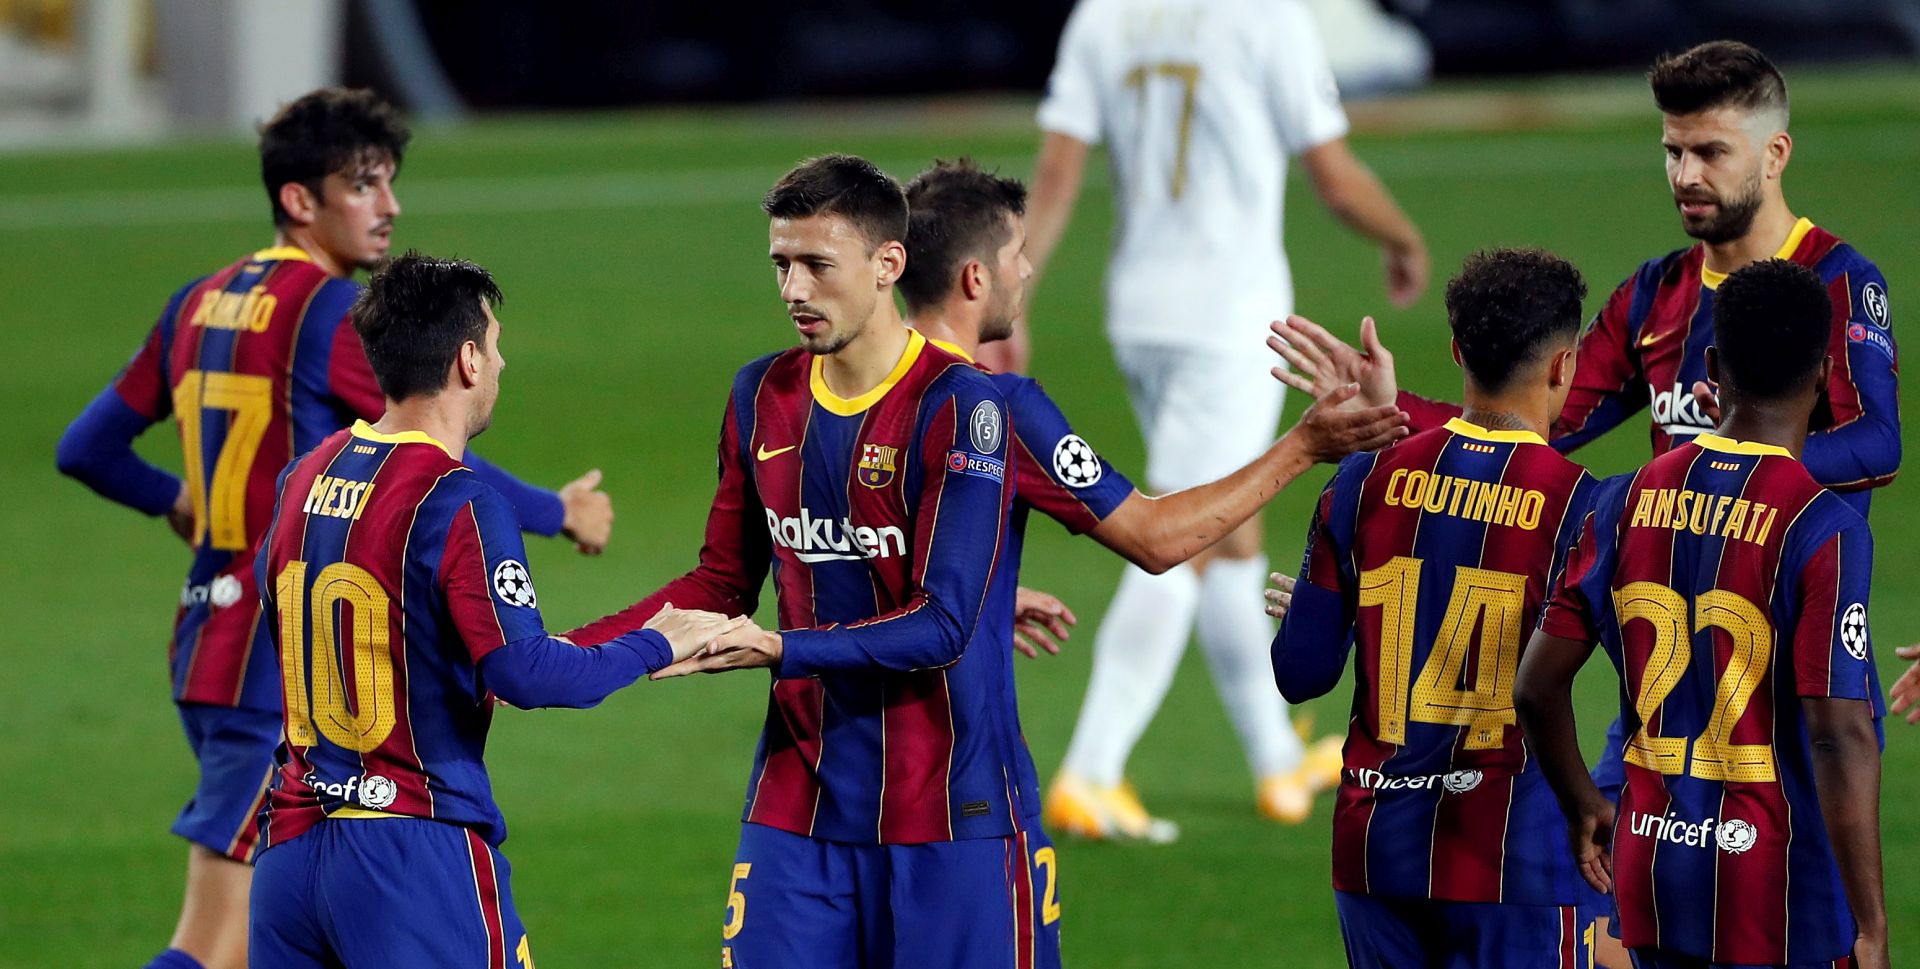 epa08760207 FC Barcelona's striker Lionel Messi (L) celebrates with teammates after scoring the 1-0 leading goal from the penalty spot during the UEFA Champions League Group G soccer match between FC Barcelona and Ferencvaros held at Camp Nou stadium, in Barcelona, Spain, 20 October 2020.  EPA/Alberto Estevez